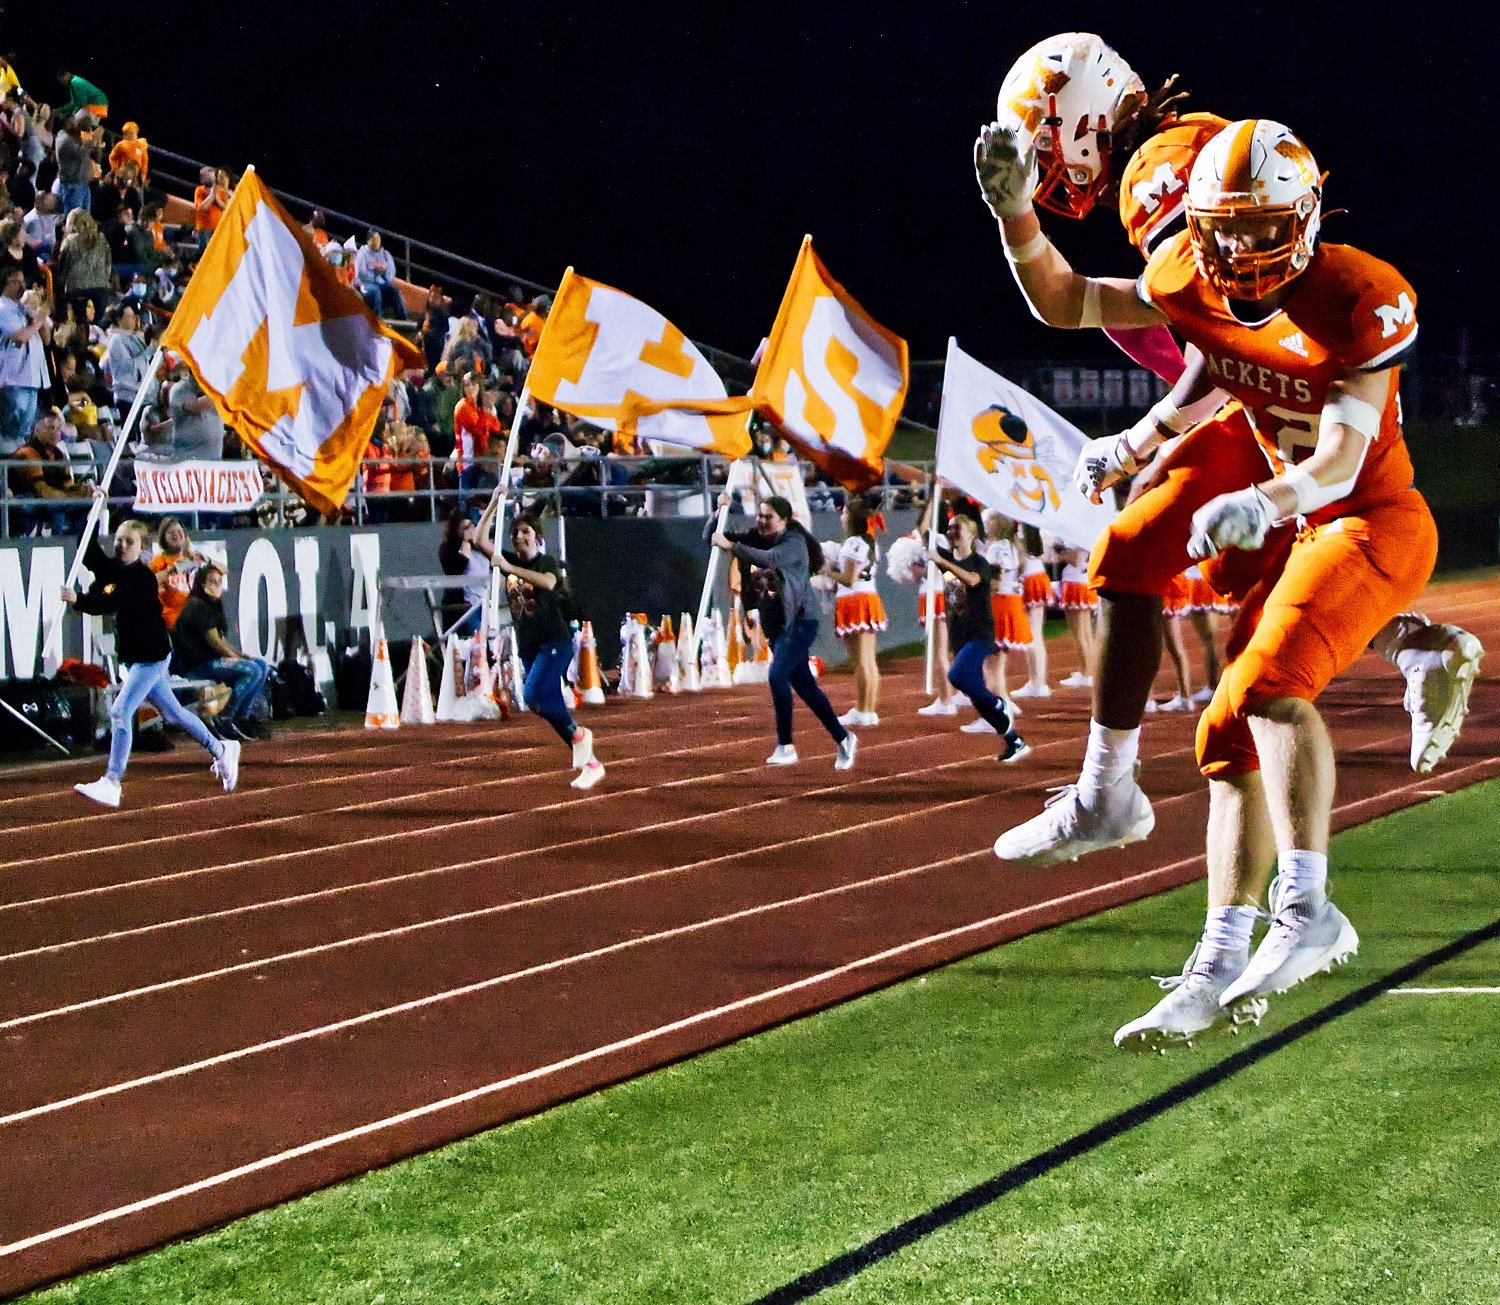 The Mineola backfield running duo of Trevion Sneed and Dawson Pendergrass celebrate a touchdown, a common sight during this homecoming game against Bonham. The Yellowjackets claimed a season title in one of Texas’ toughest districts, losing games to only Mt. Vernon.